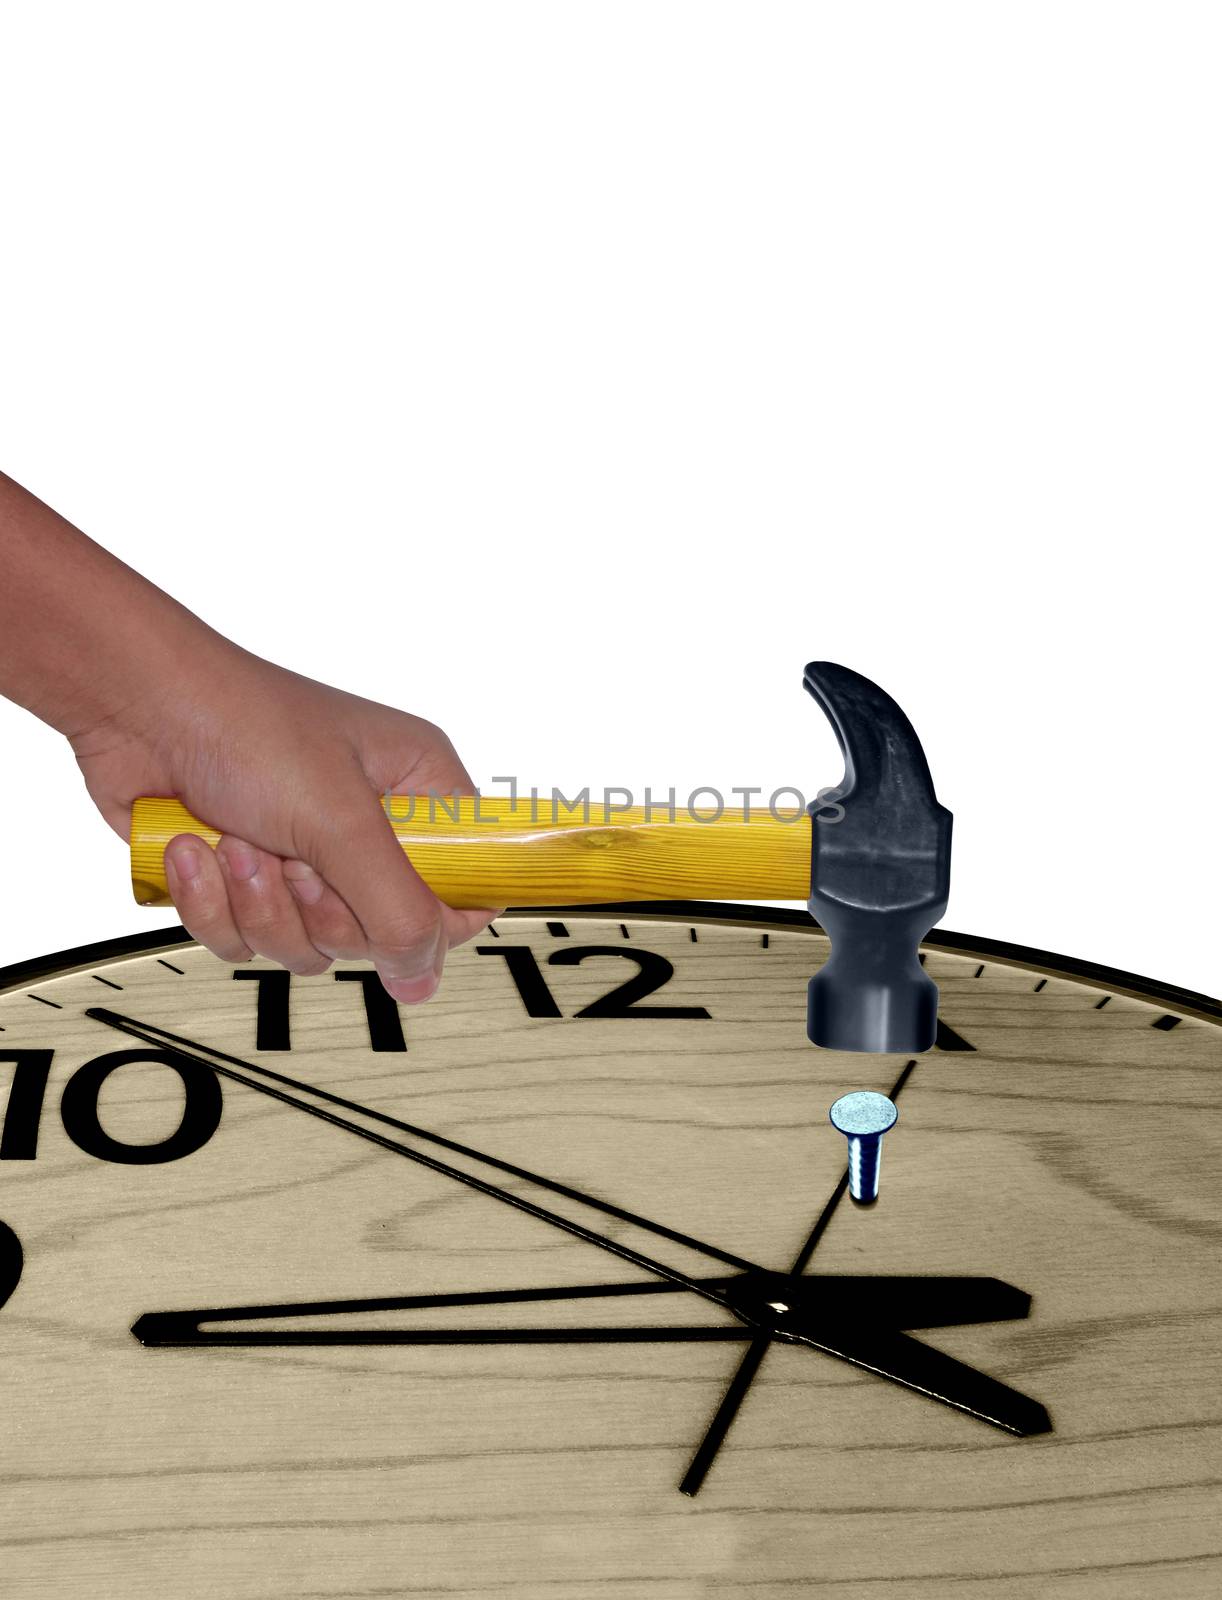 Hammer in Human Hand Hitting Nail in Clock, Concept by yands